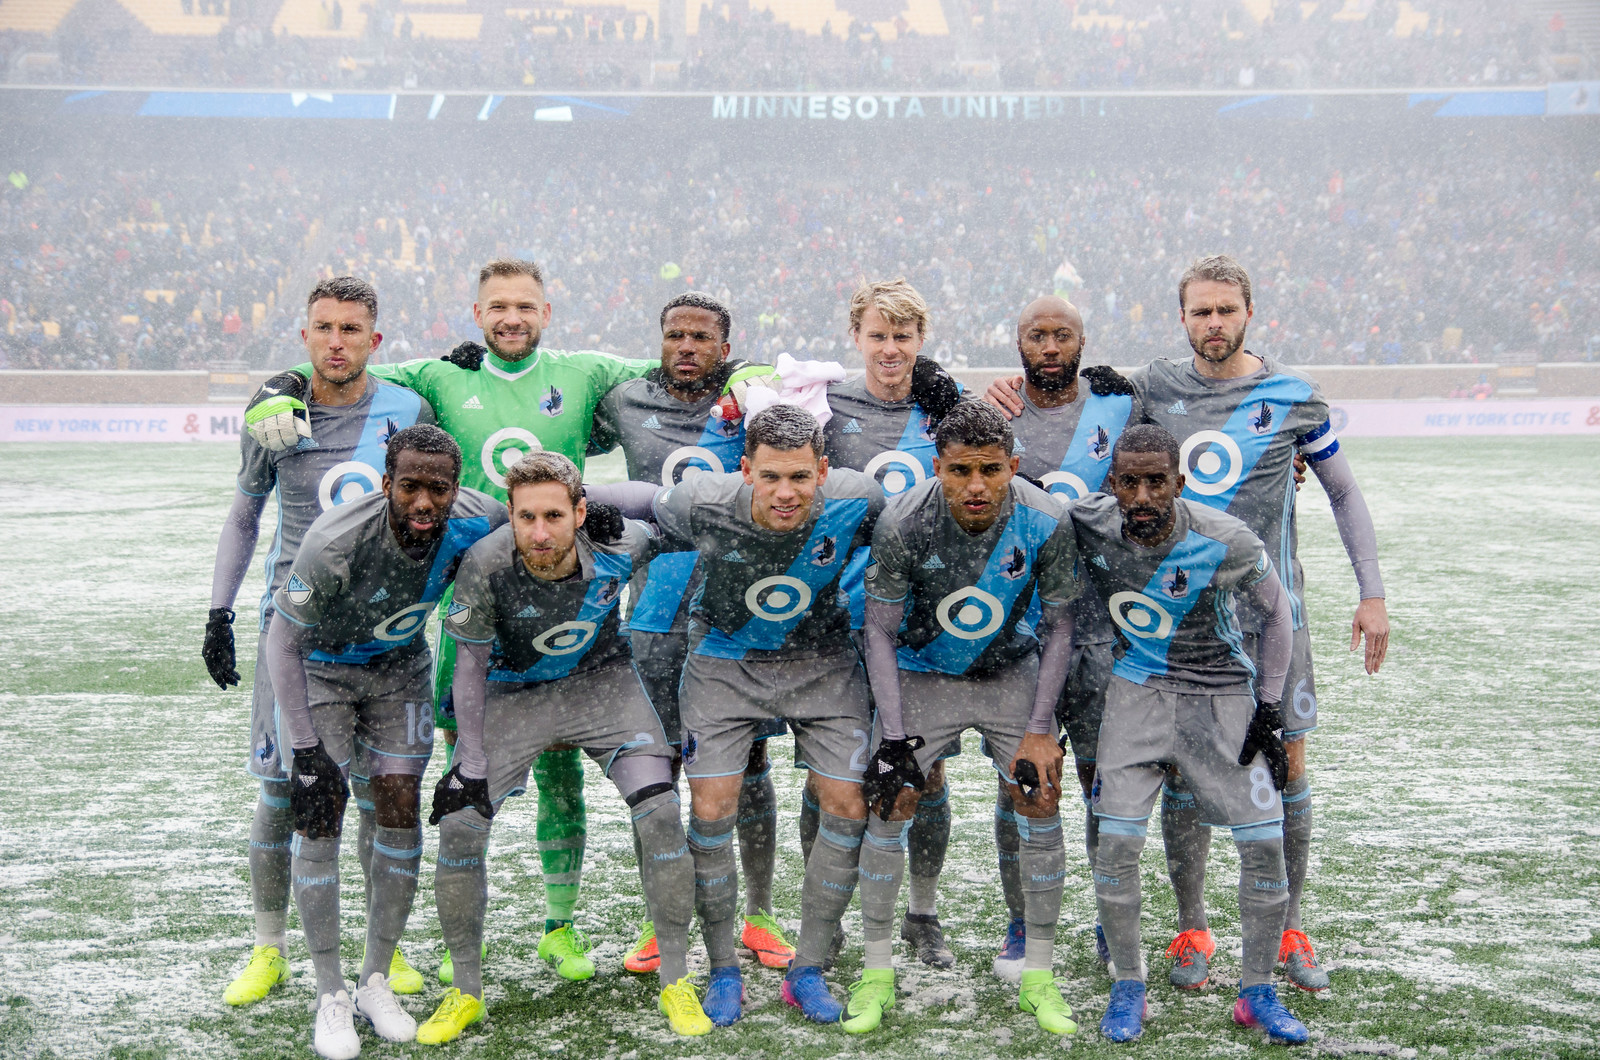 Gambles, Bargains, and Busts Revealed in Minnesota United Salary List